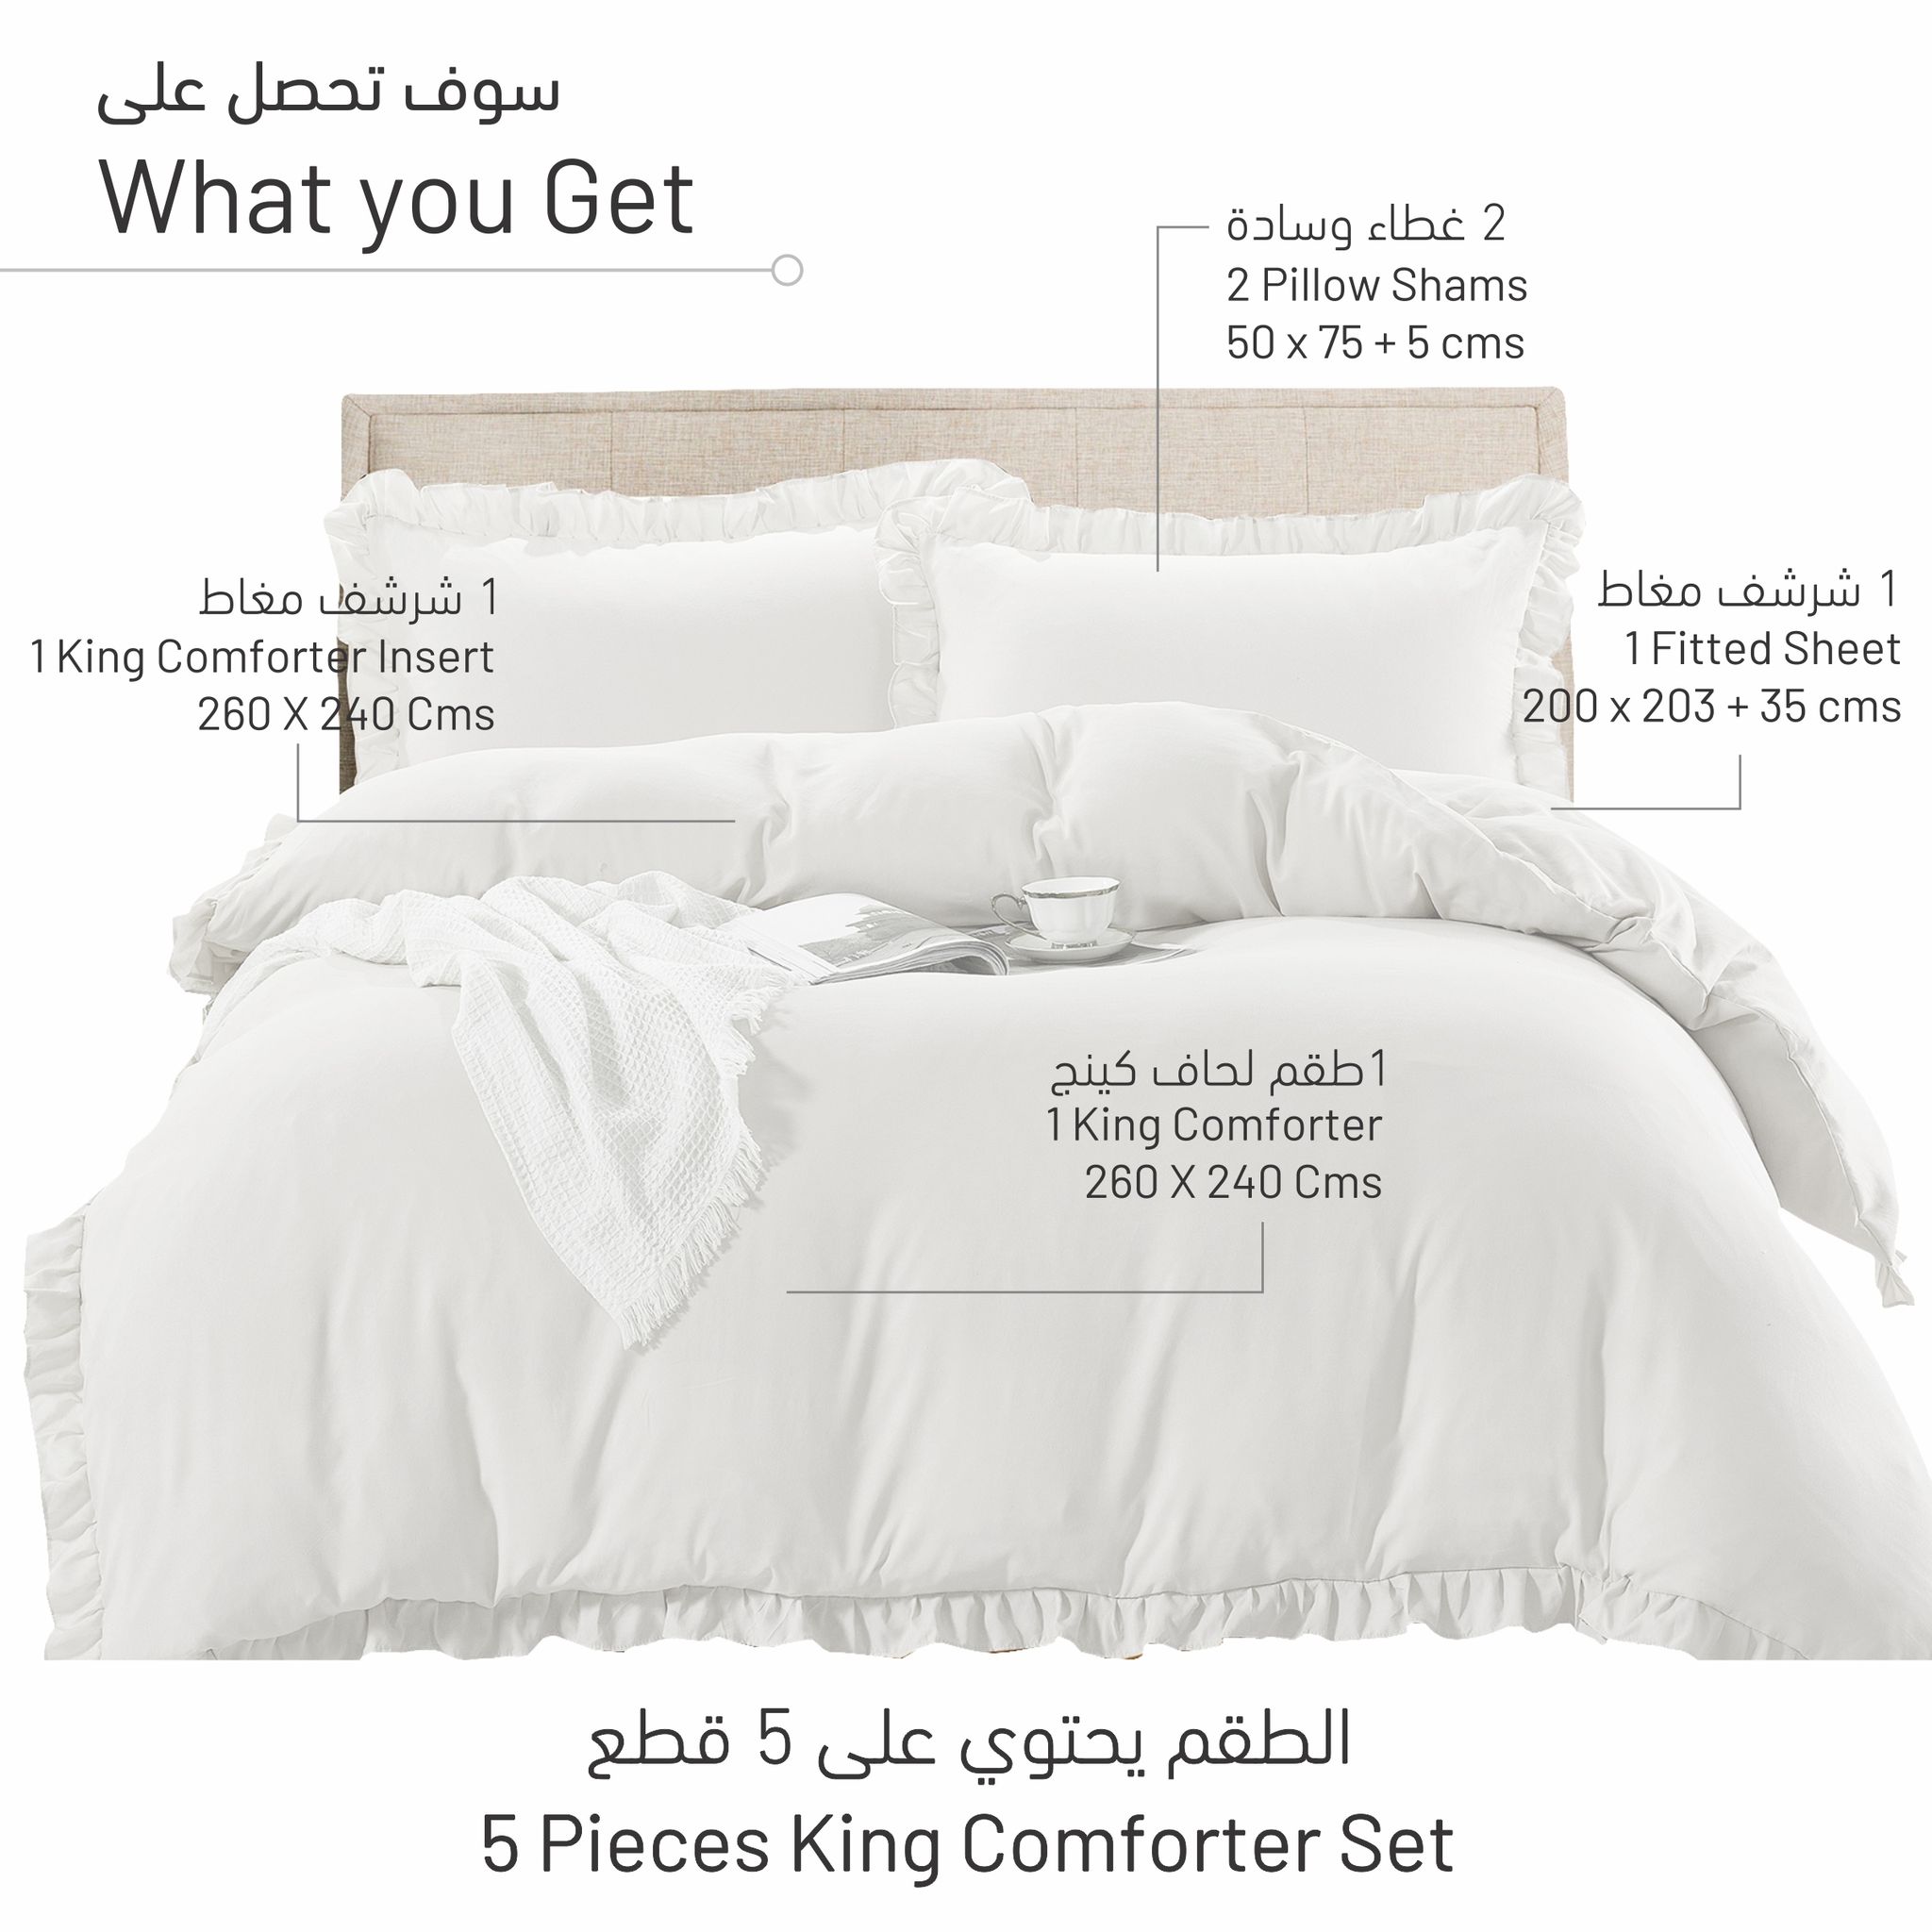 5-Piece Comforter Set with Ruffled Border and Removable Filler, King Size, 260 x 240 cm, White